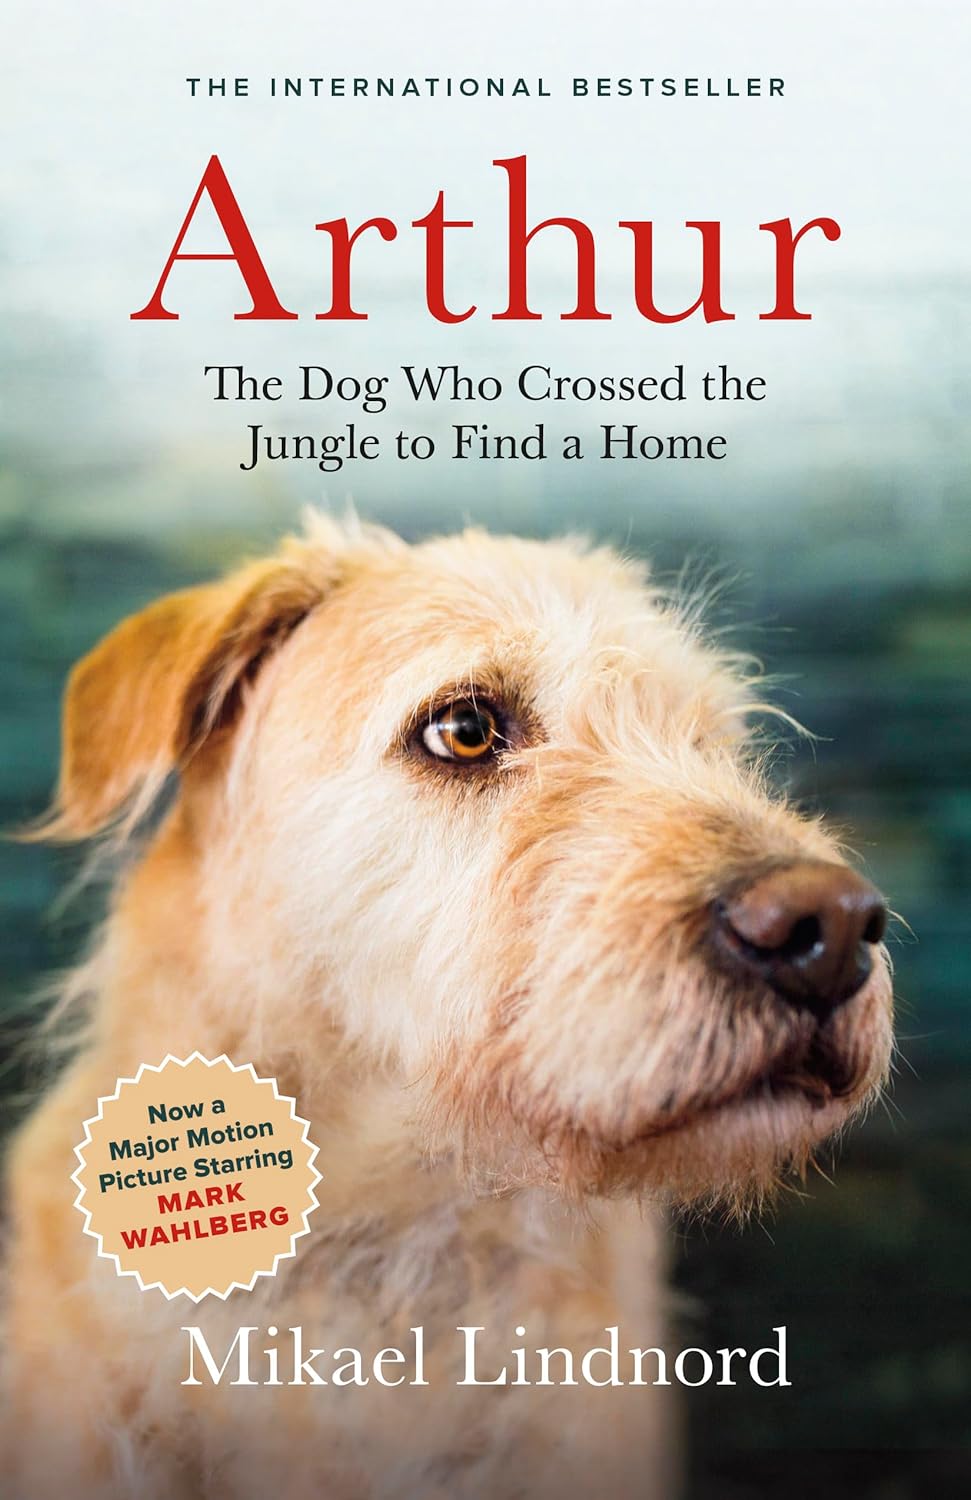 Arthur The Dog Who Crossed the Jungle to Find a Home